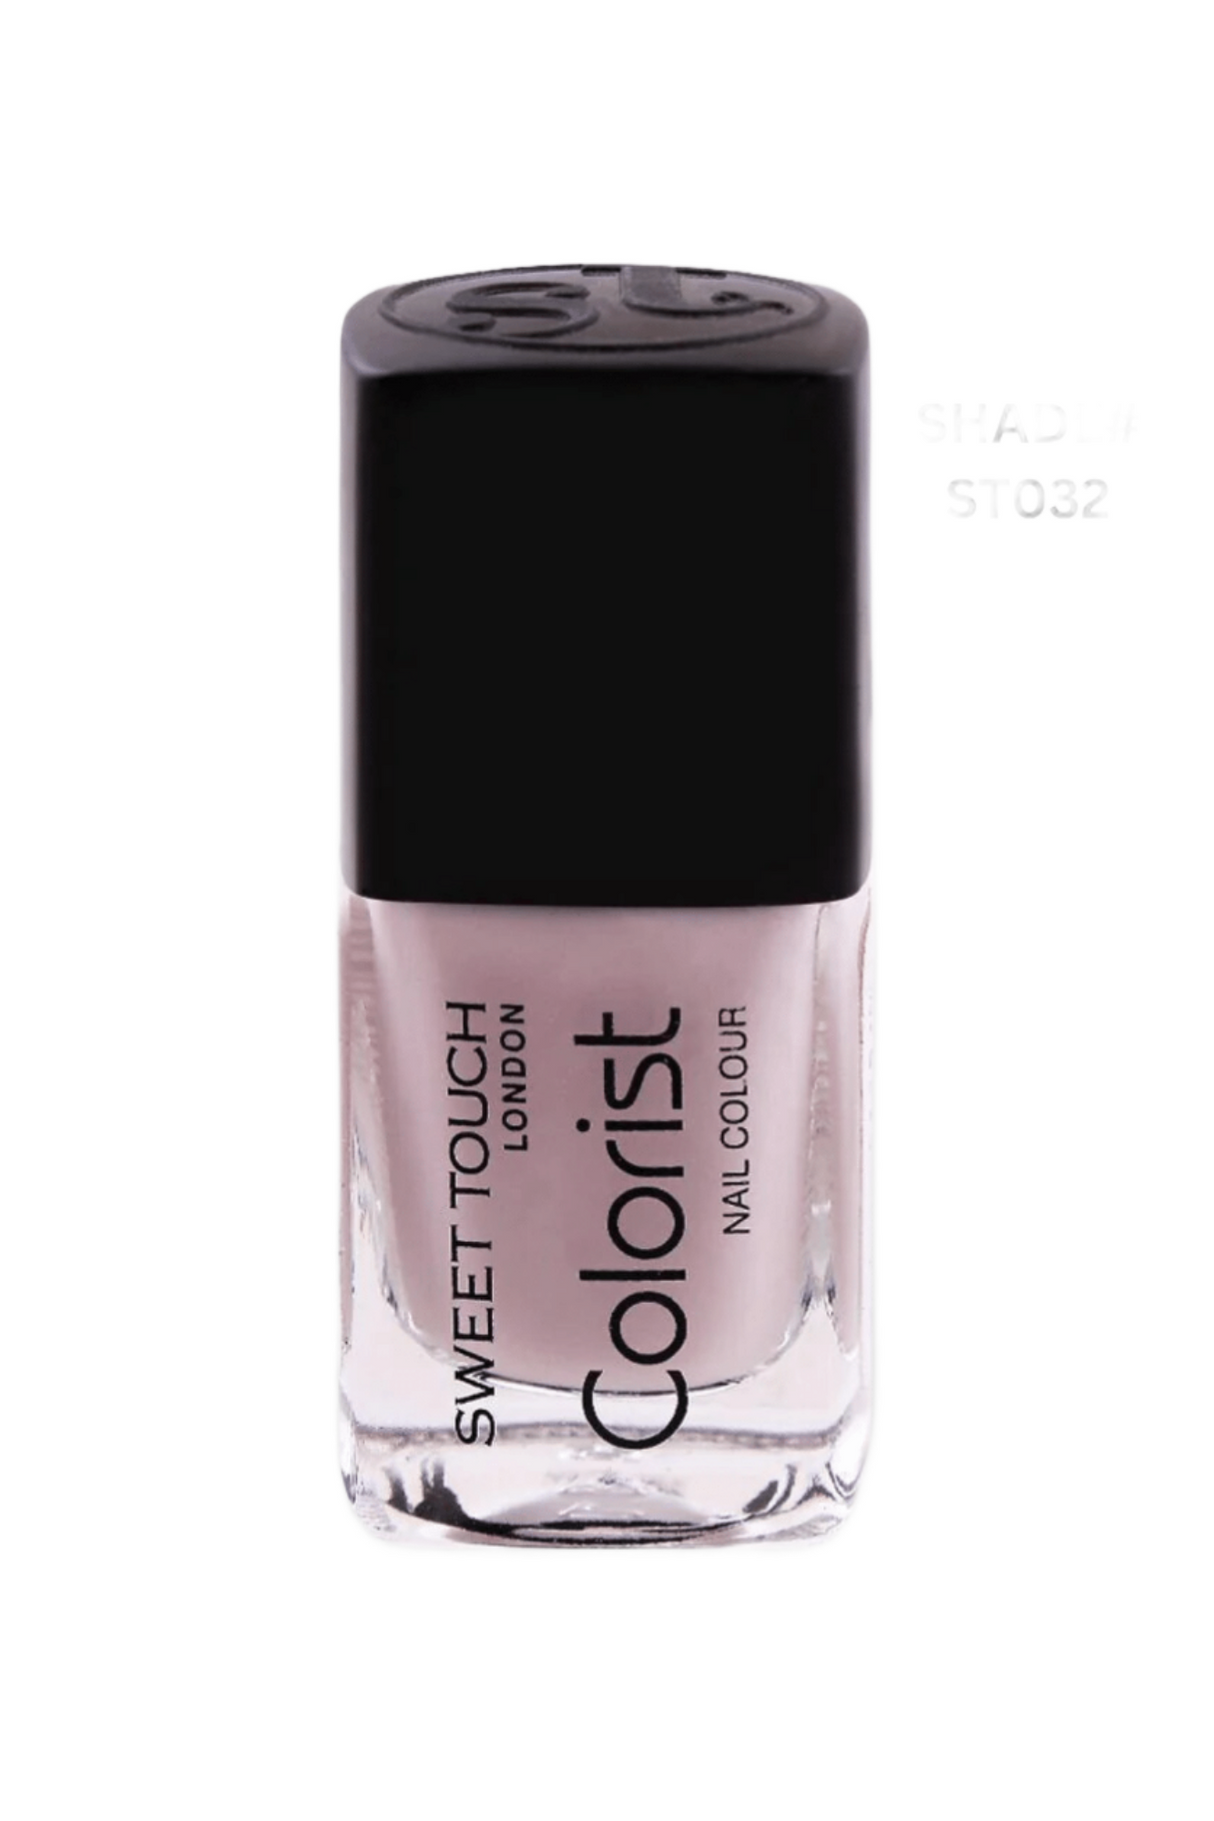 sweet touch nail polish colorist st032 12ml